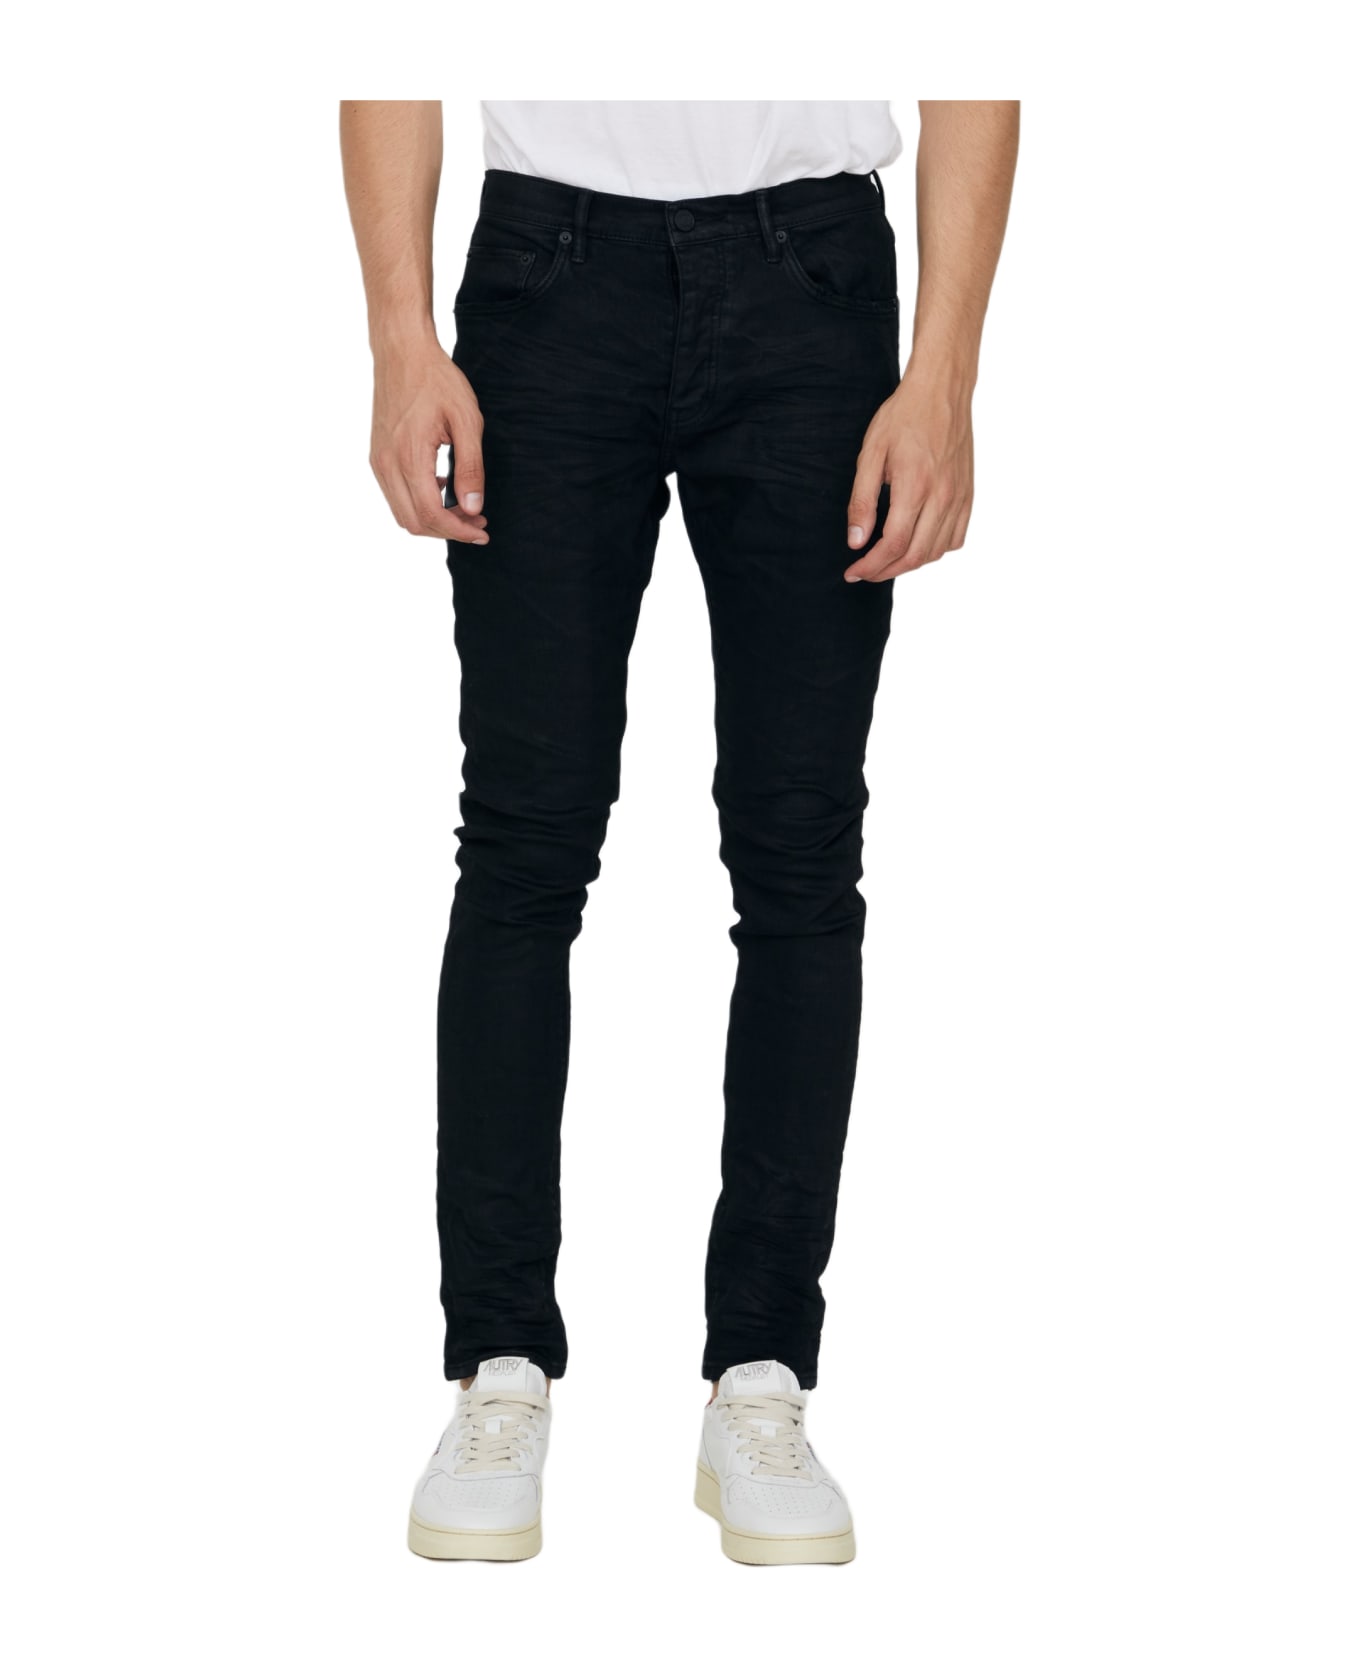 Mens High End Denim Jeans: Purple, Black & Retro Streetwear Pants For  Casual And Sweatwear From Clothing86store, $32.45